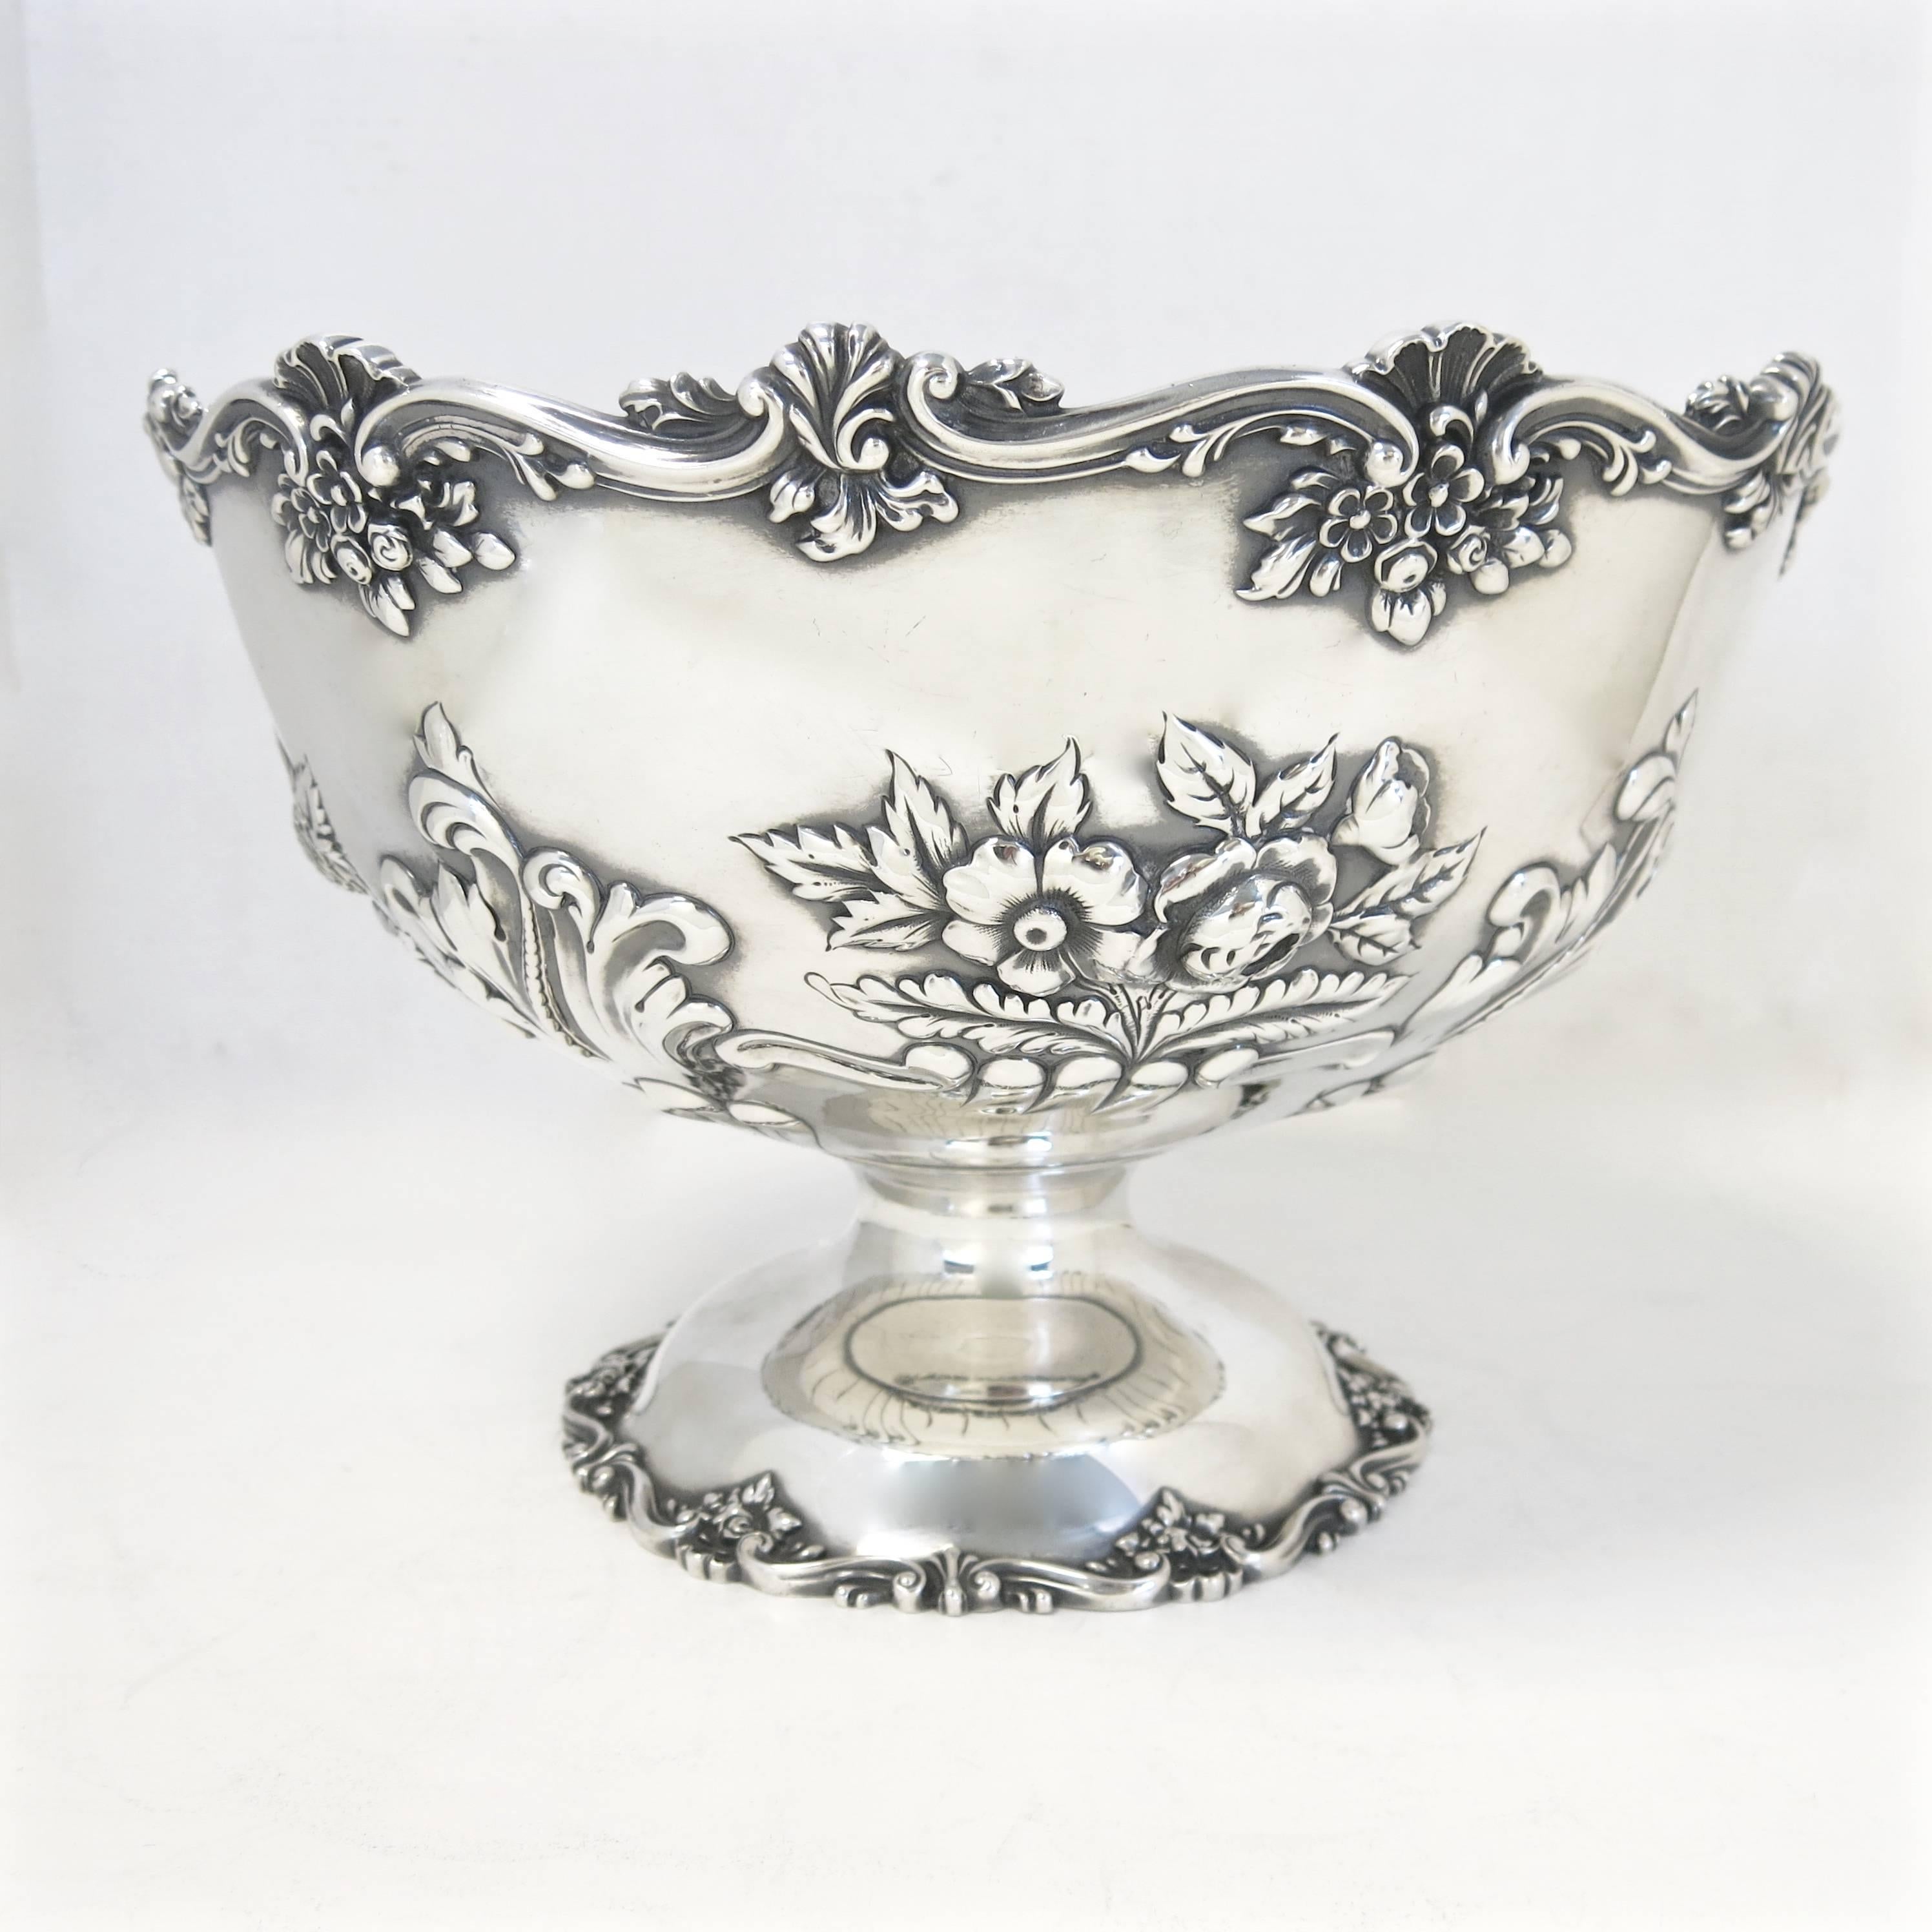 Large Art Nouveau style, antique sterling silver bowl, made by black, starr & frost, circa 1900.
The bowl is decorated with a hand chased floral decoration on the body, with an applied floral border on top rim, matching the applied decoration on